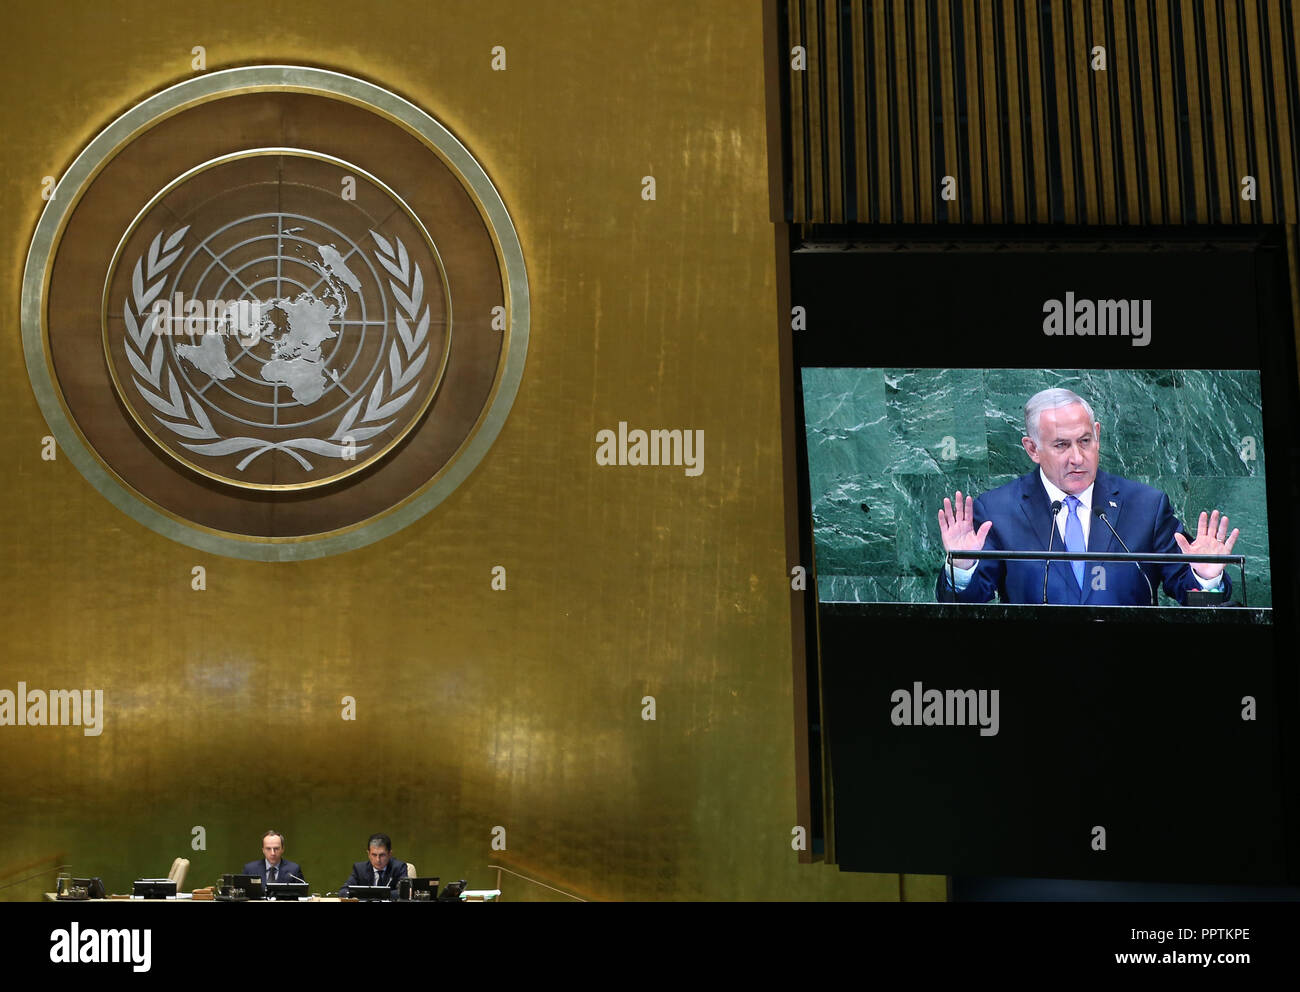 (180927) -- UNITED NATIONS, Sept. 27, 2018 (Xinhua) -- Israeli Prime Minister Benjamin Netanyahu (on screen) addresses the General Debate of the 73rd session of the United Nations General Assembly at the UN headquarters in New York, on Sept. 27, 2018. (Xinhua/Qin Lang) Stock Photo